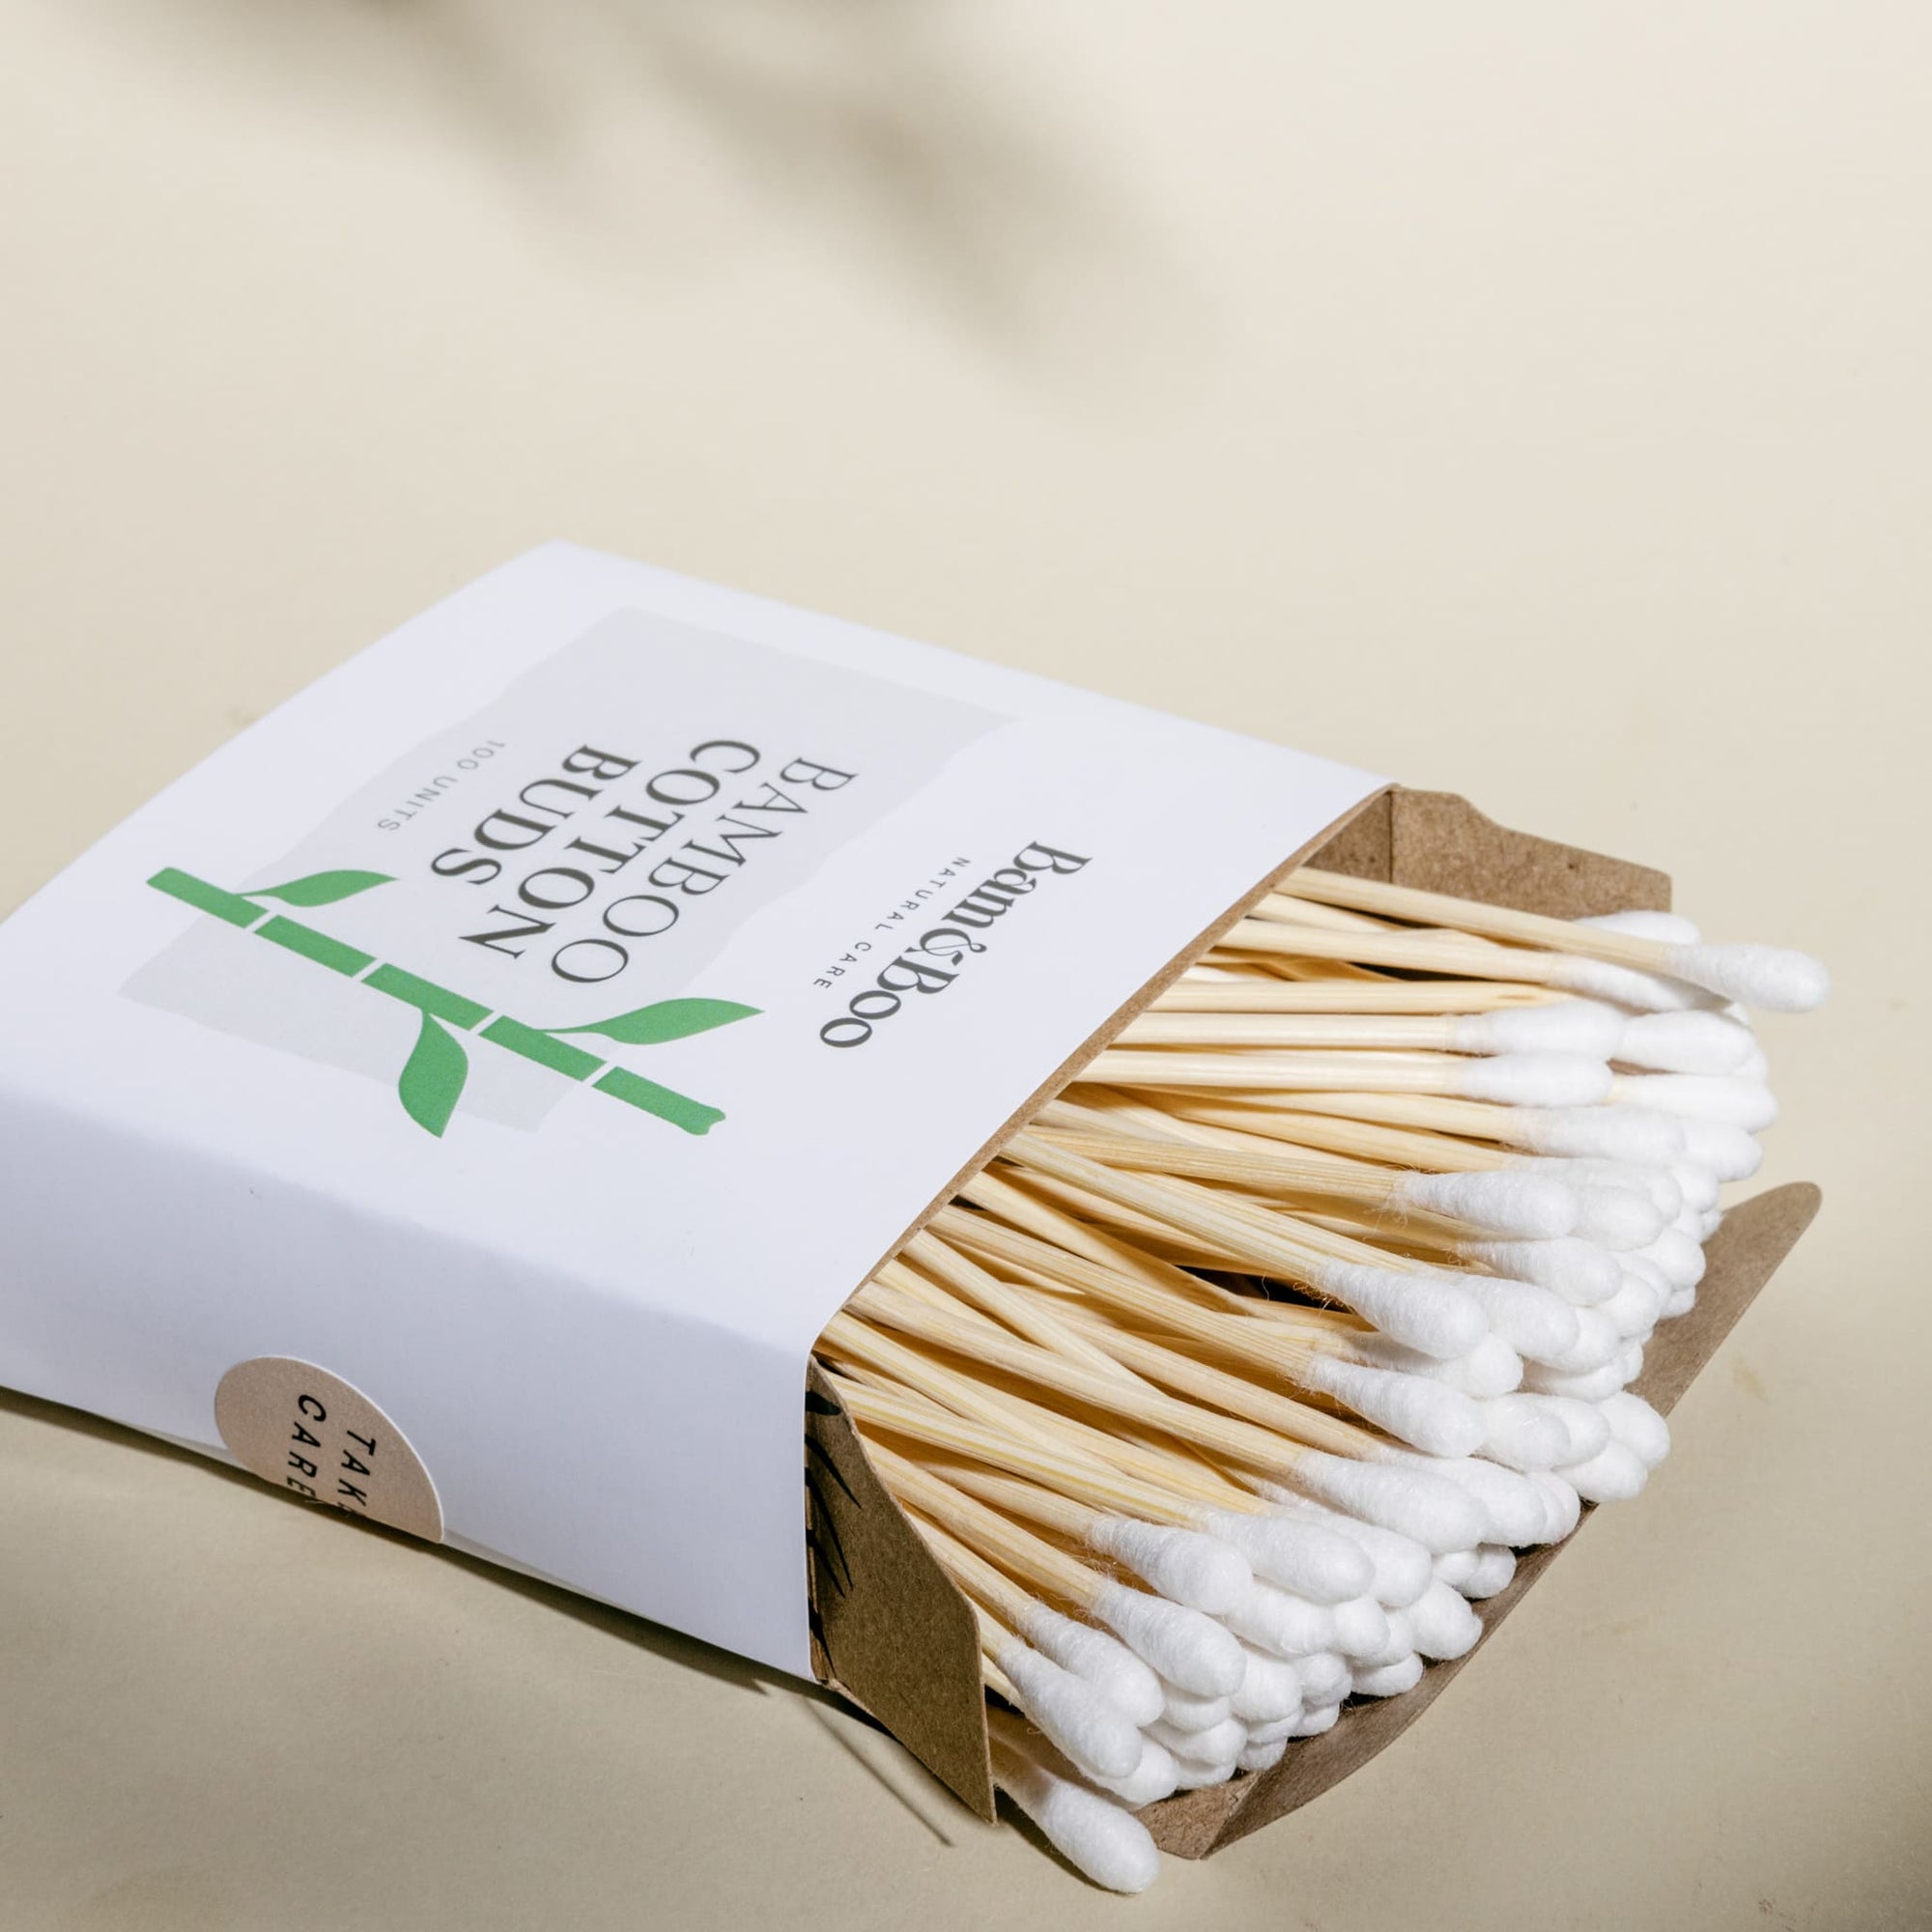 COTTON BUDS - Bam&Boo - Eco-friendly, vegan, sustainable oral and personal care